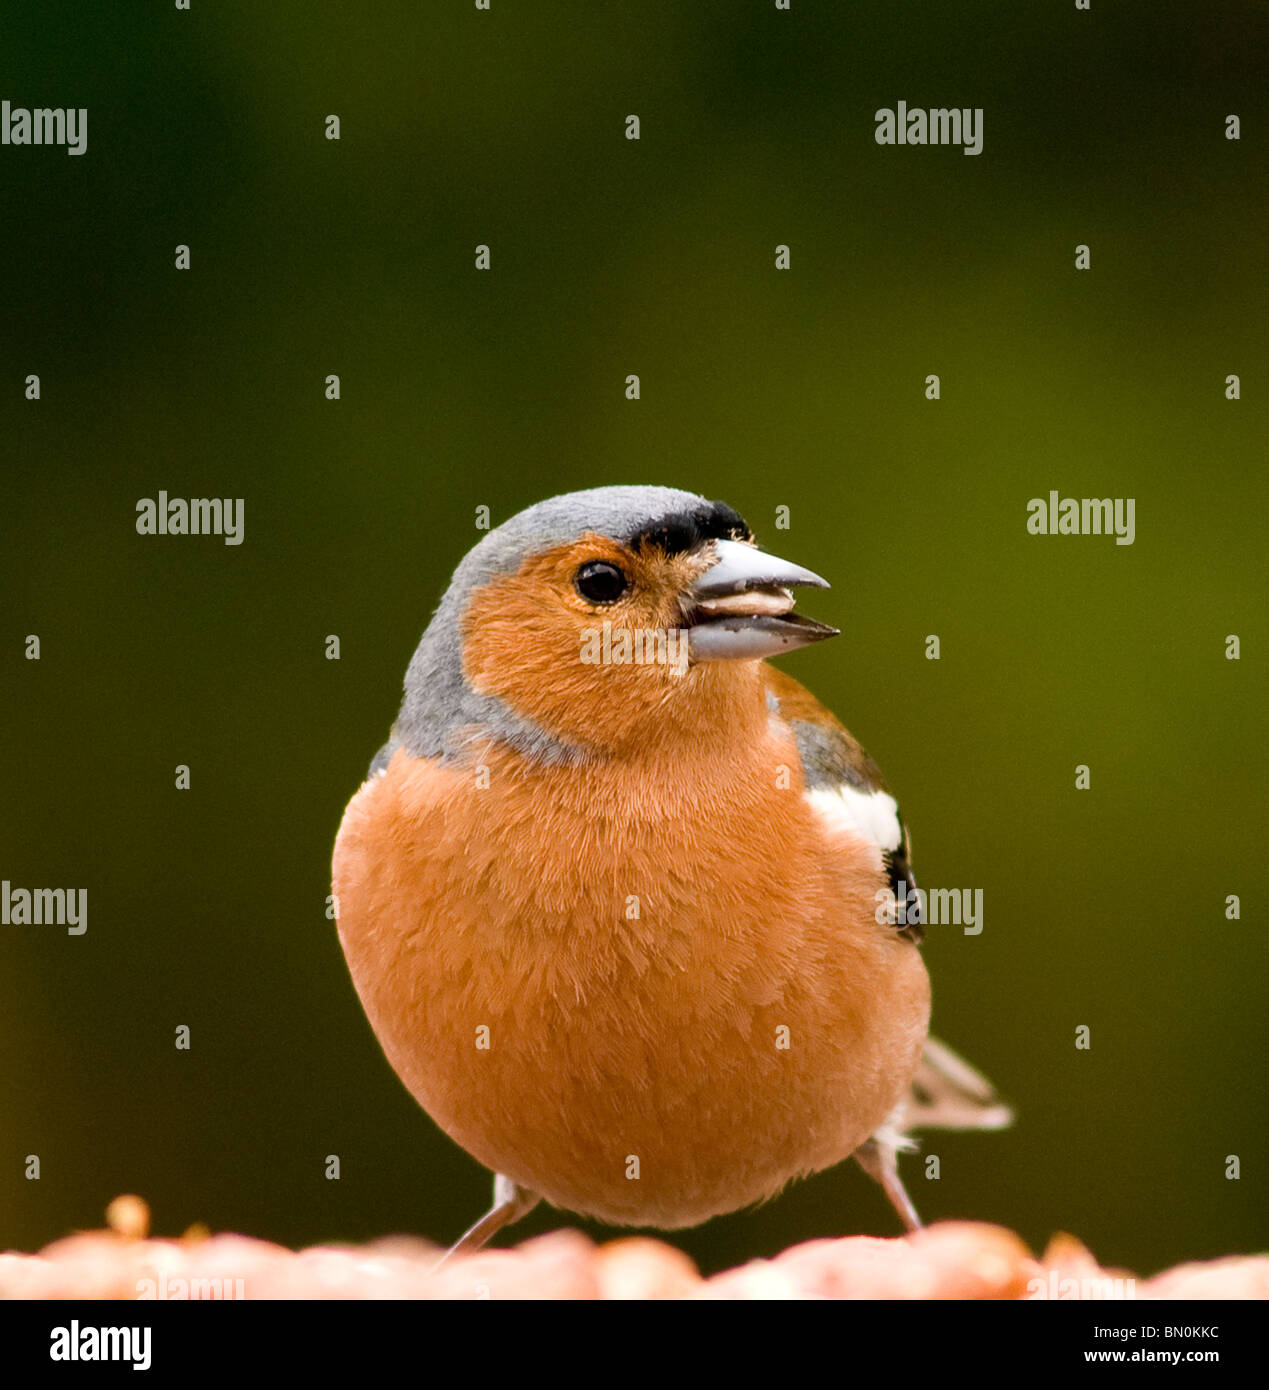 A male chaffinch on a bird table Stock Photo